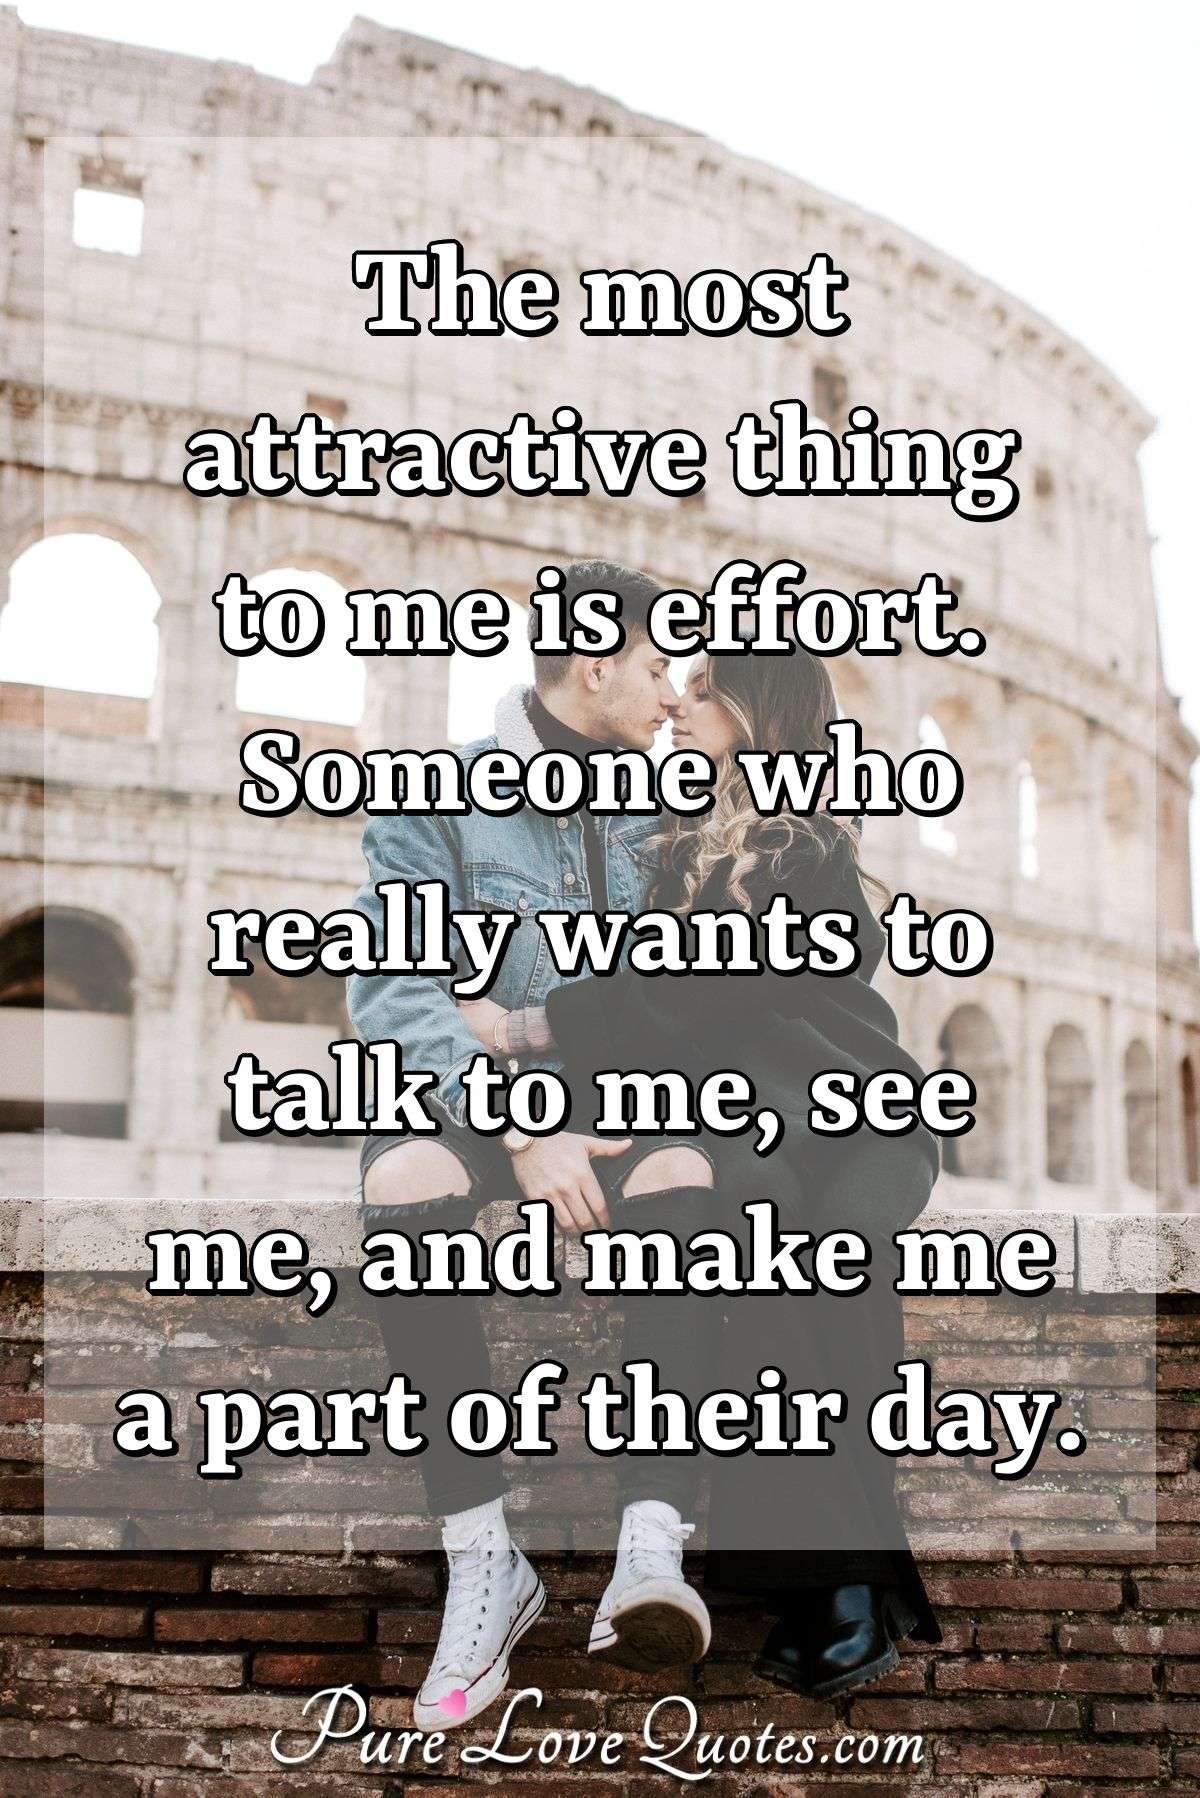 The most attractive thing to me is effort. Someone who really wants to talk to me, see me, and make me a part of their day. - Anonymous